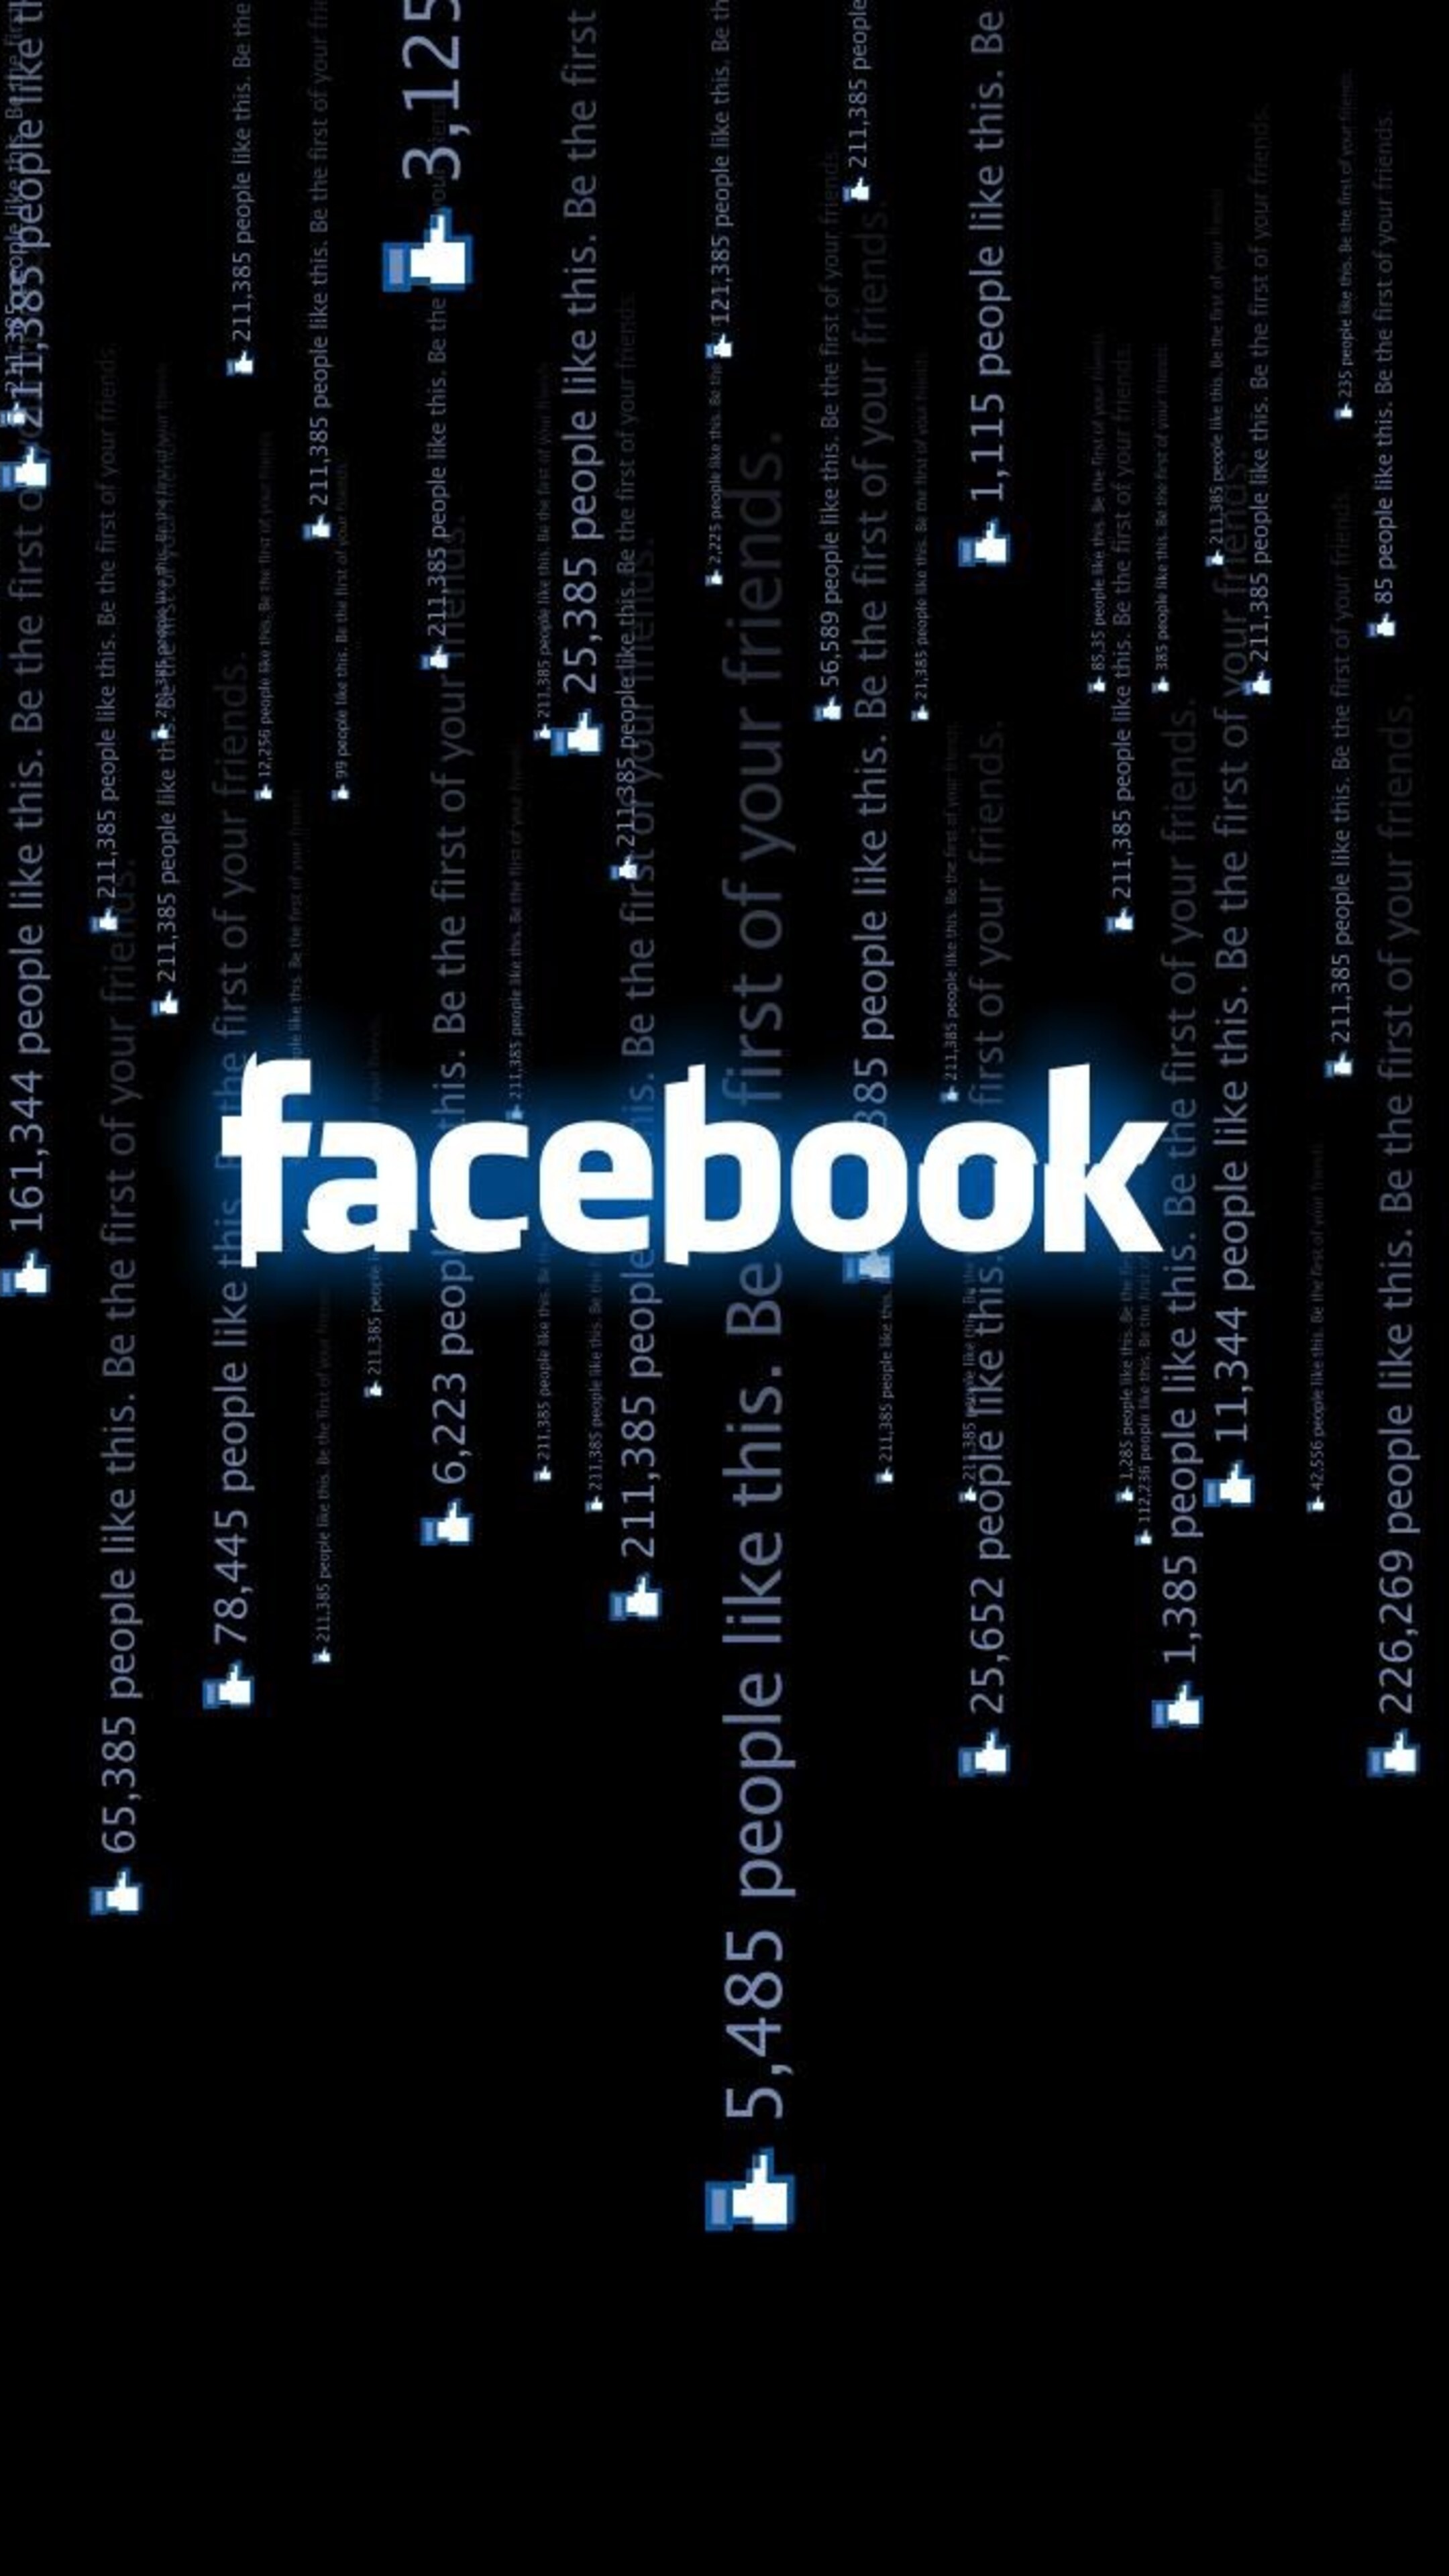 Facebook: Matrix, A social networking service originally launched as FaceMash. 2160x3840 4K Background.